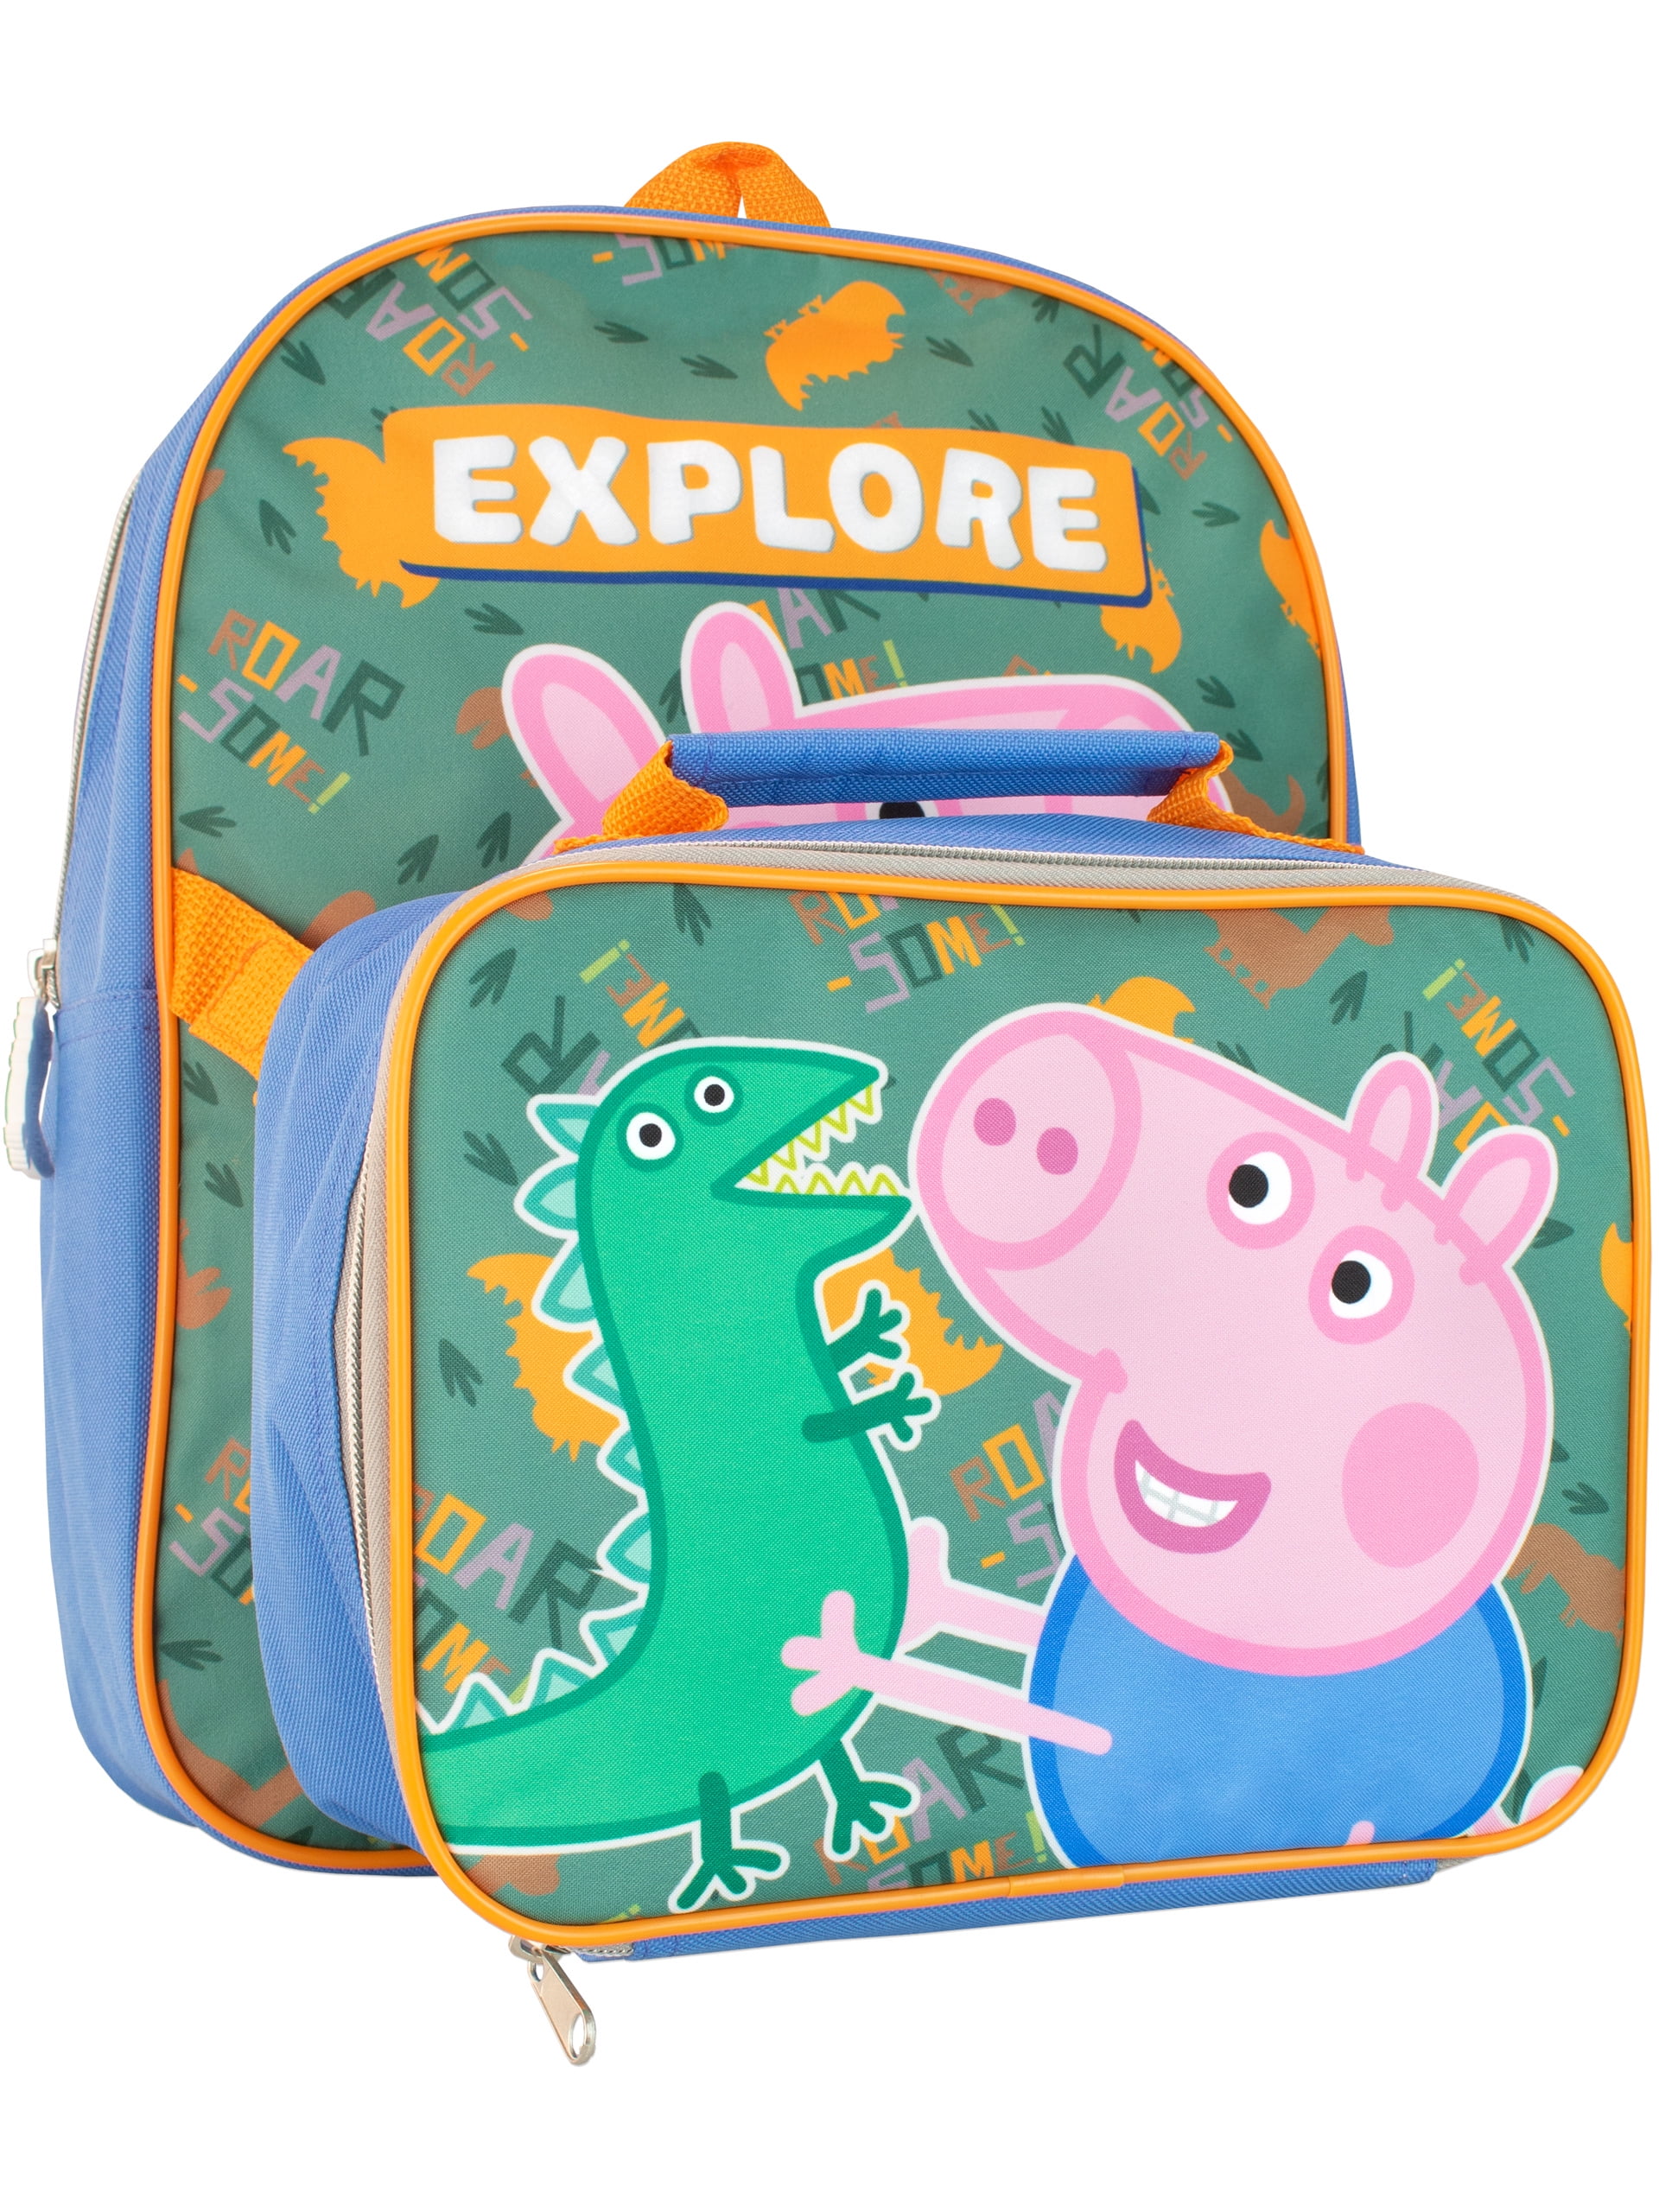 PEPPA PIG School Bags & Back Packs Online India - Buy at FirstCry.com